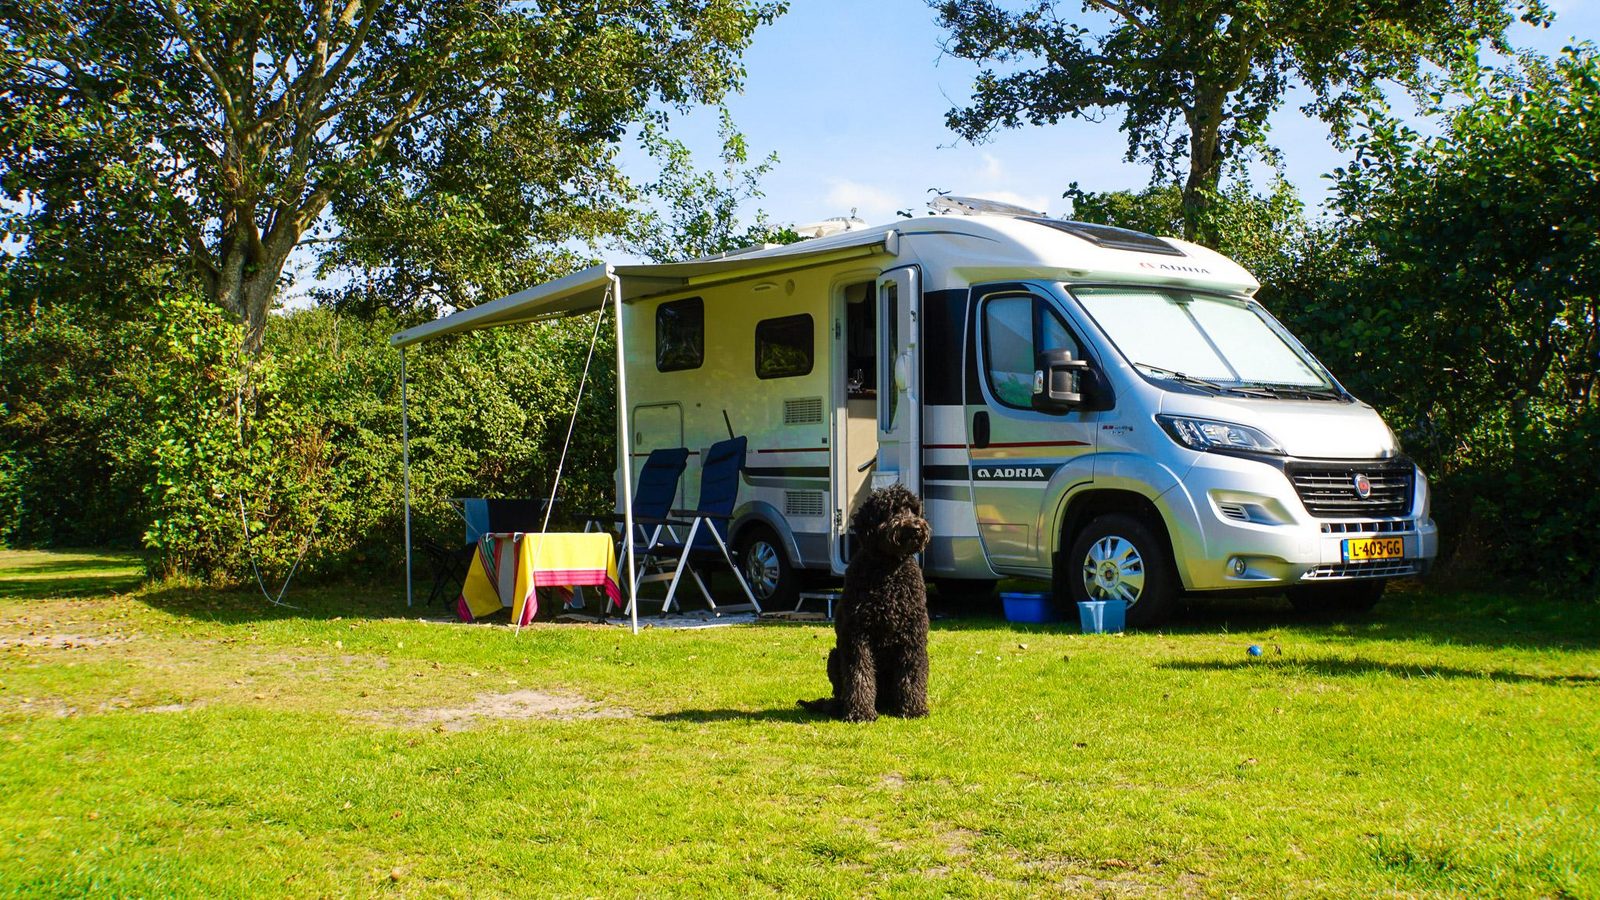 Take a look at our camping lots